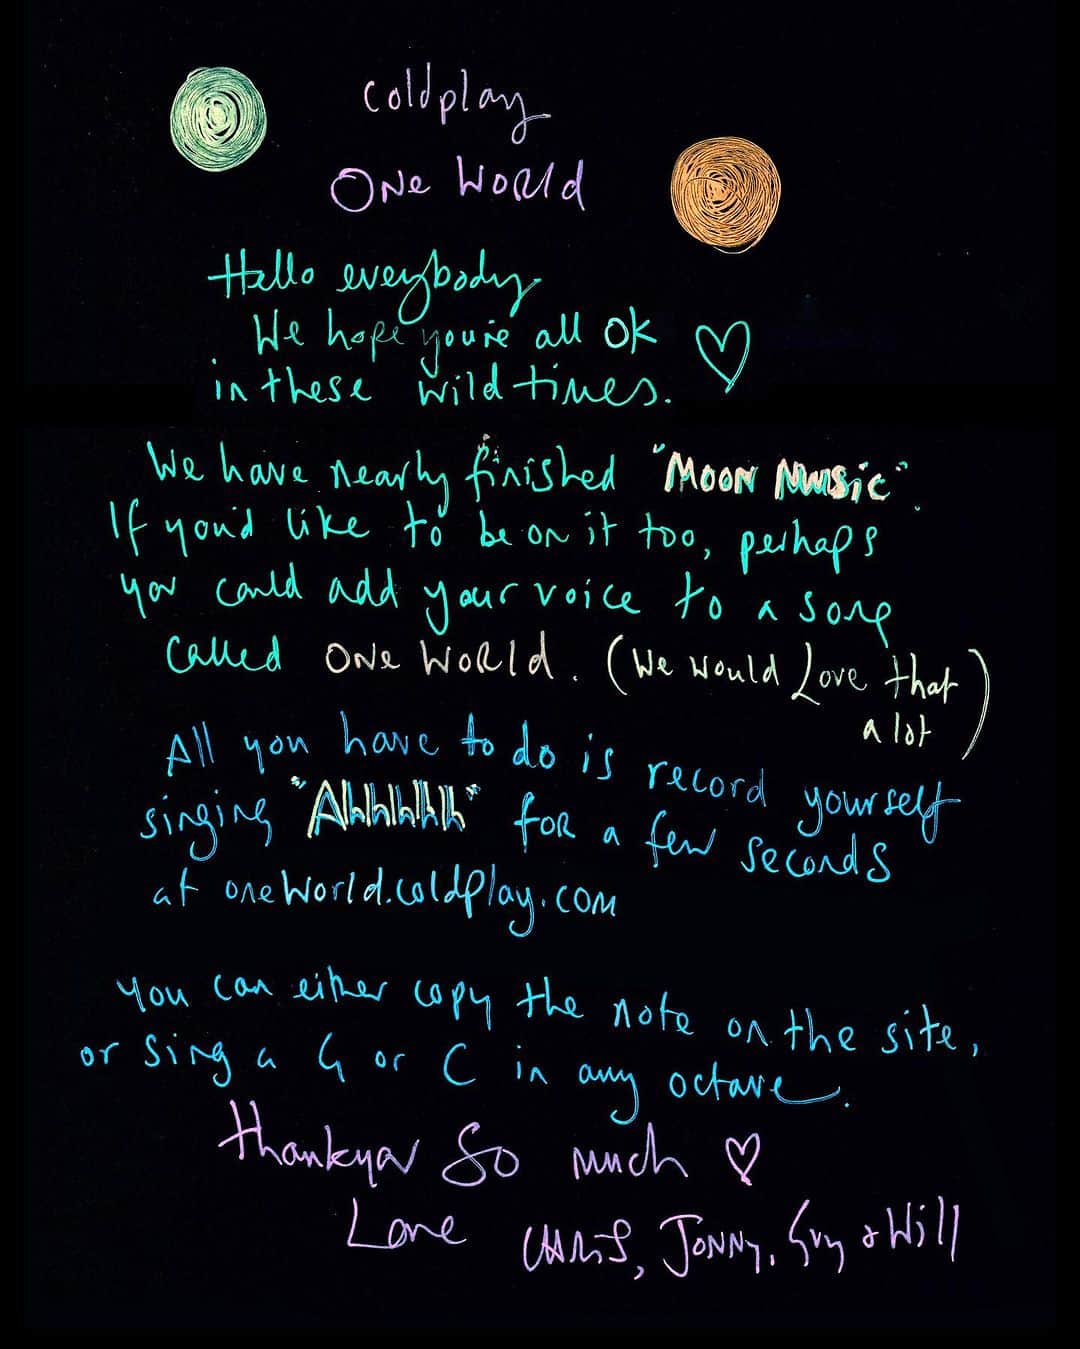 Coldplayのインスタグラム：「Hello everybody. We hope you are all ok in these wild times.  We have nearly finished Moon Music. If you'd like to be on it too, perhaps you could add your voice to a song called One World. (We would love that a lot.)  All you have to do is record yourself singing "Ahhhhh" for a few seconds at oneworld.coldplay.com (link in bio).  You can either copy the note on the site, or sing a G or C in any octave.  Thankyou so much.  Love,  Chris, Guy, Will and Jonny  #OneWorld #MoonMusic」